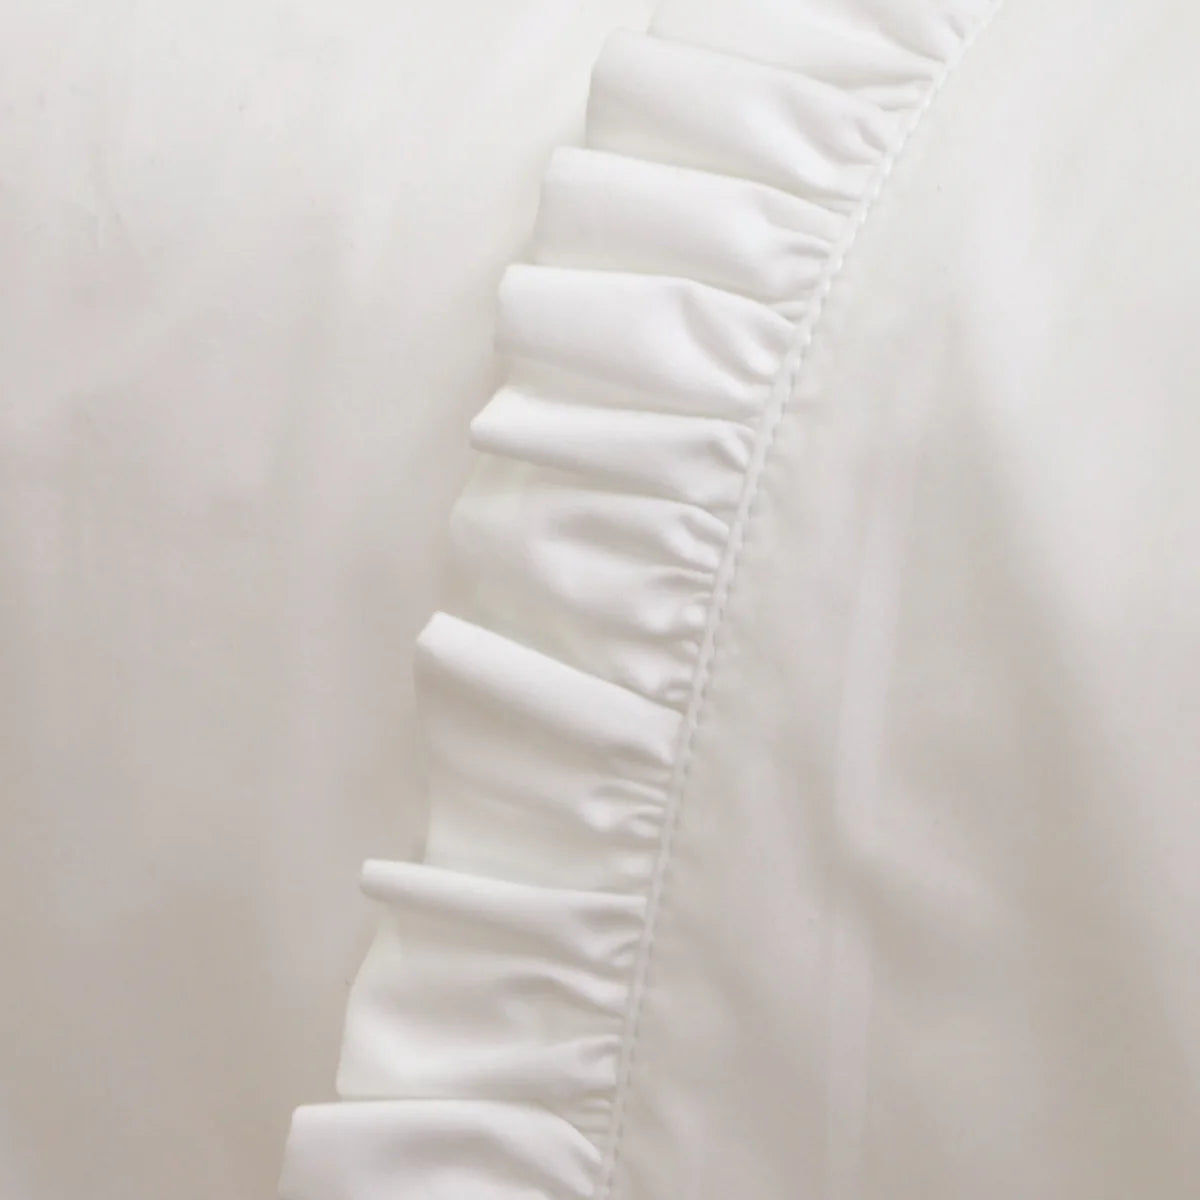 Audrey Ruffle Cotton Percale Sheet Set by Pom Pom at Home